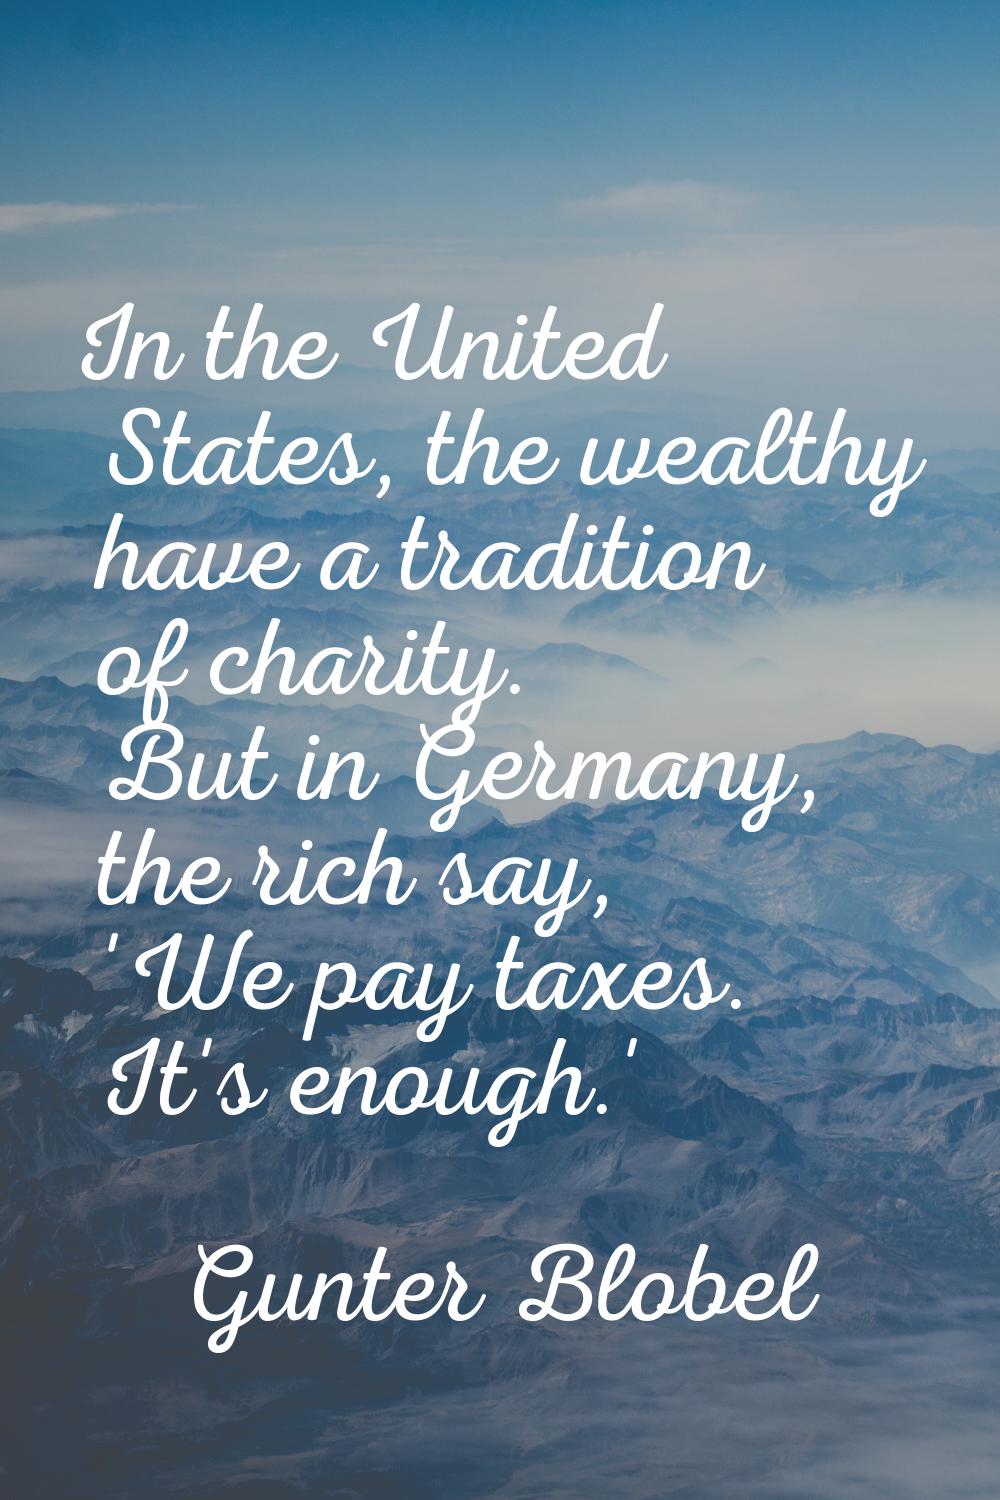 In the United States, the wealthy have a tradition of charity. But in Germany, the rich say, 'We pa